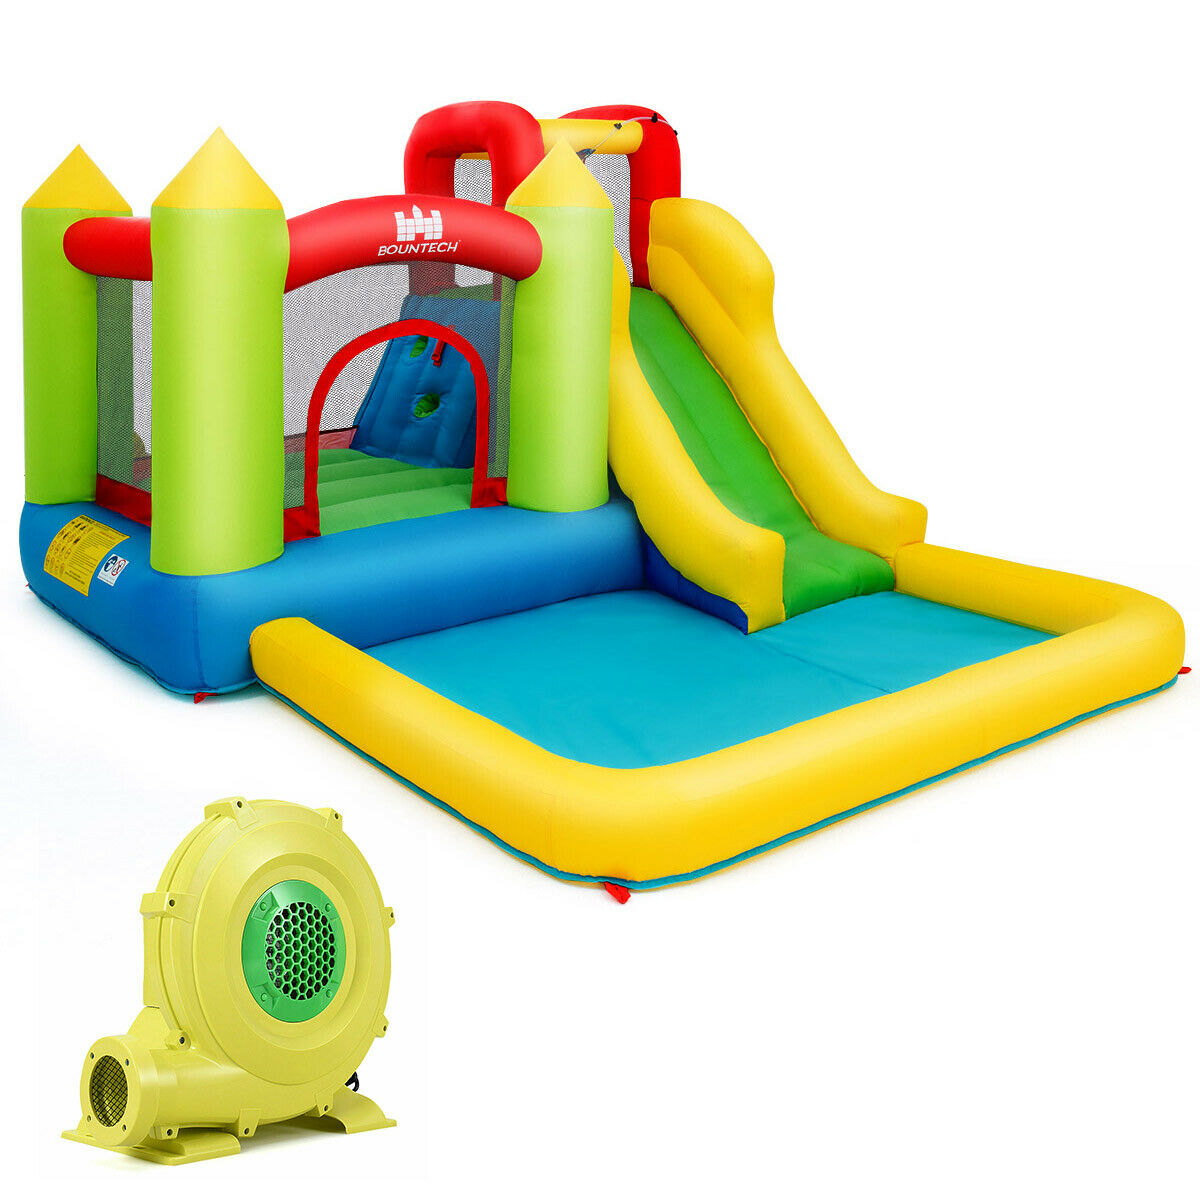 Outdoor Inflatable Bounce House Water Slide Climb Bouncer Pool